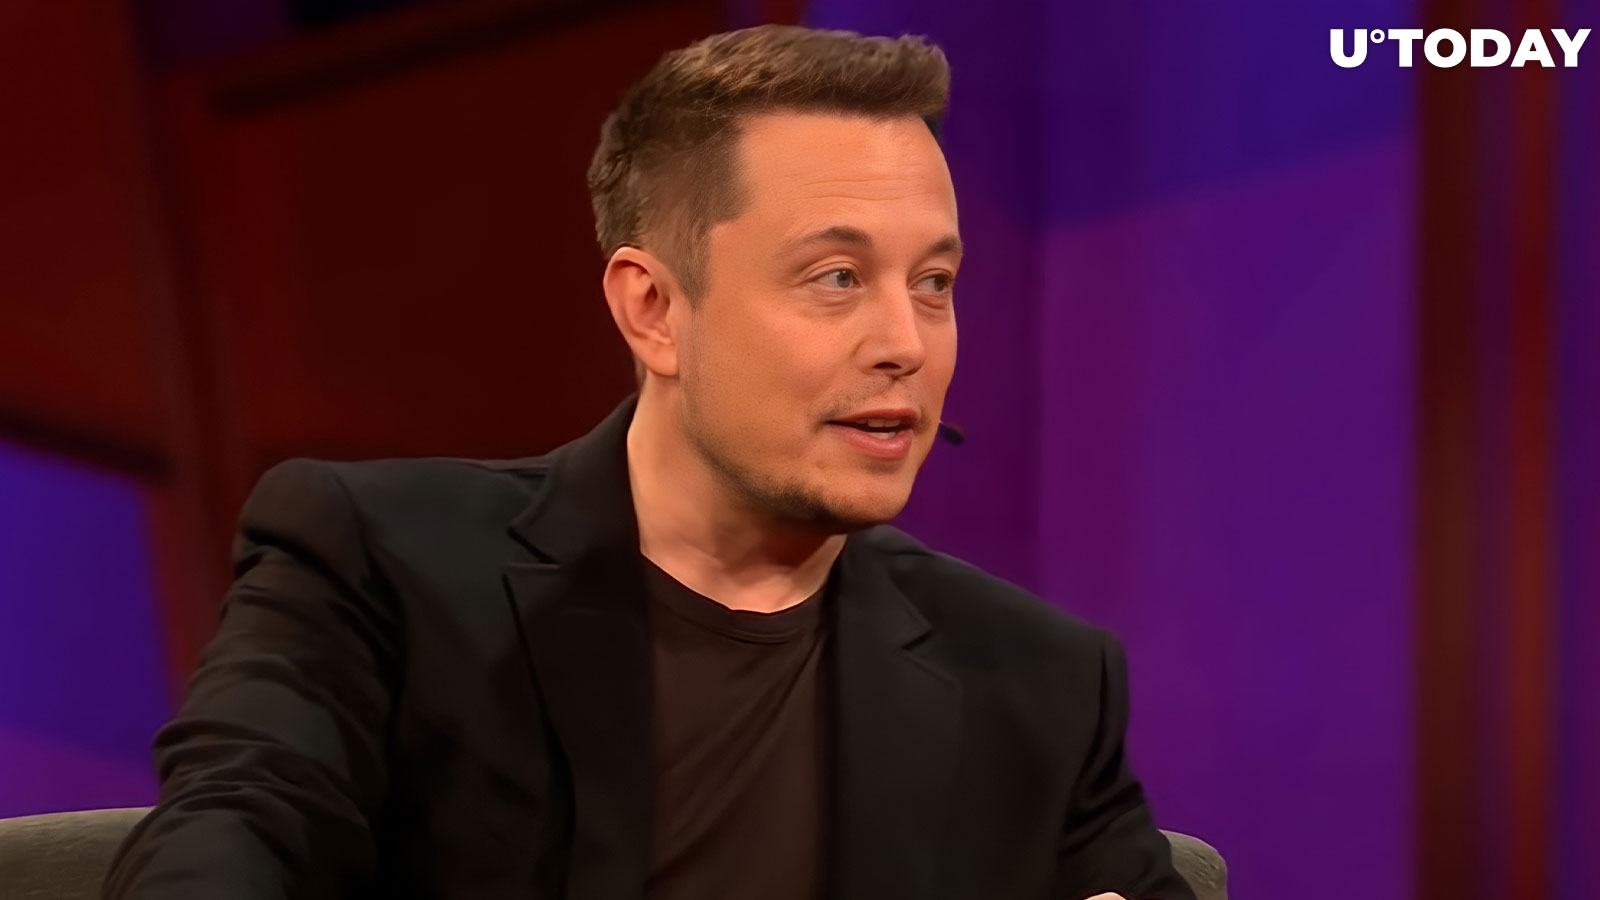 Dogecoin up 10% as Elon Musk Returns to Twitter Purchase Deal, What's Next?